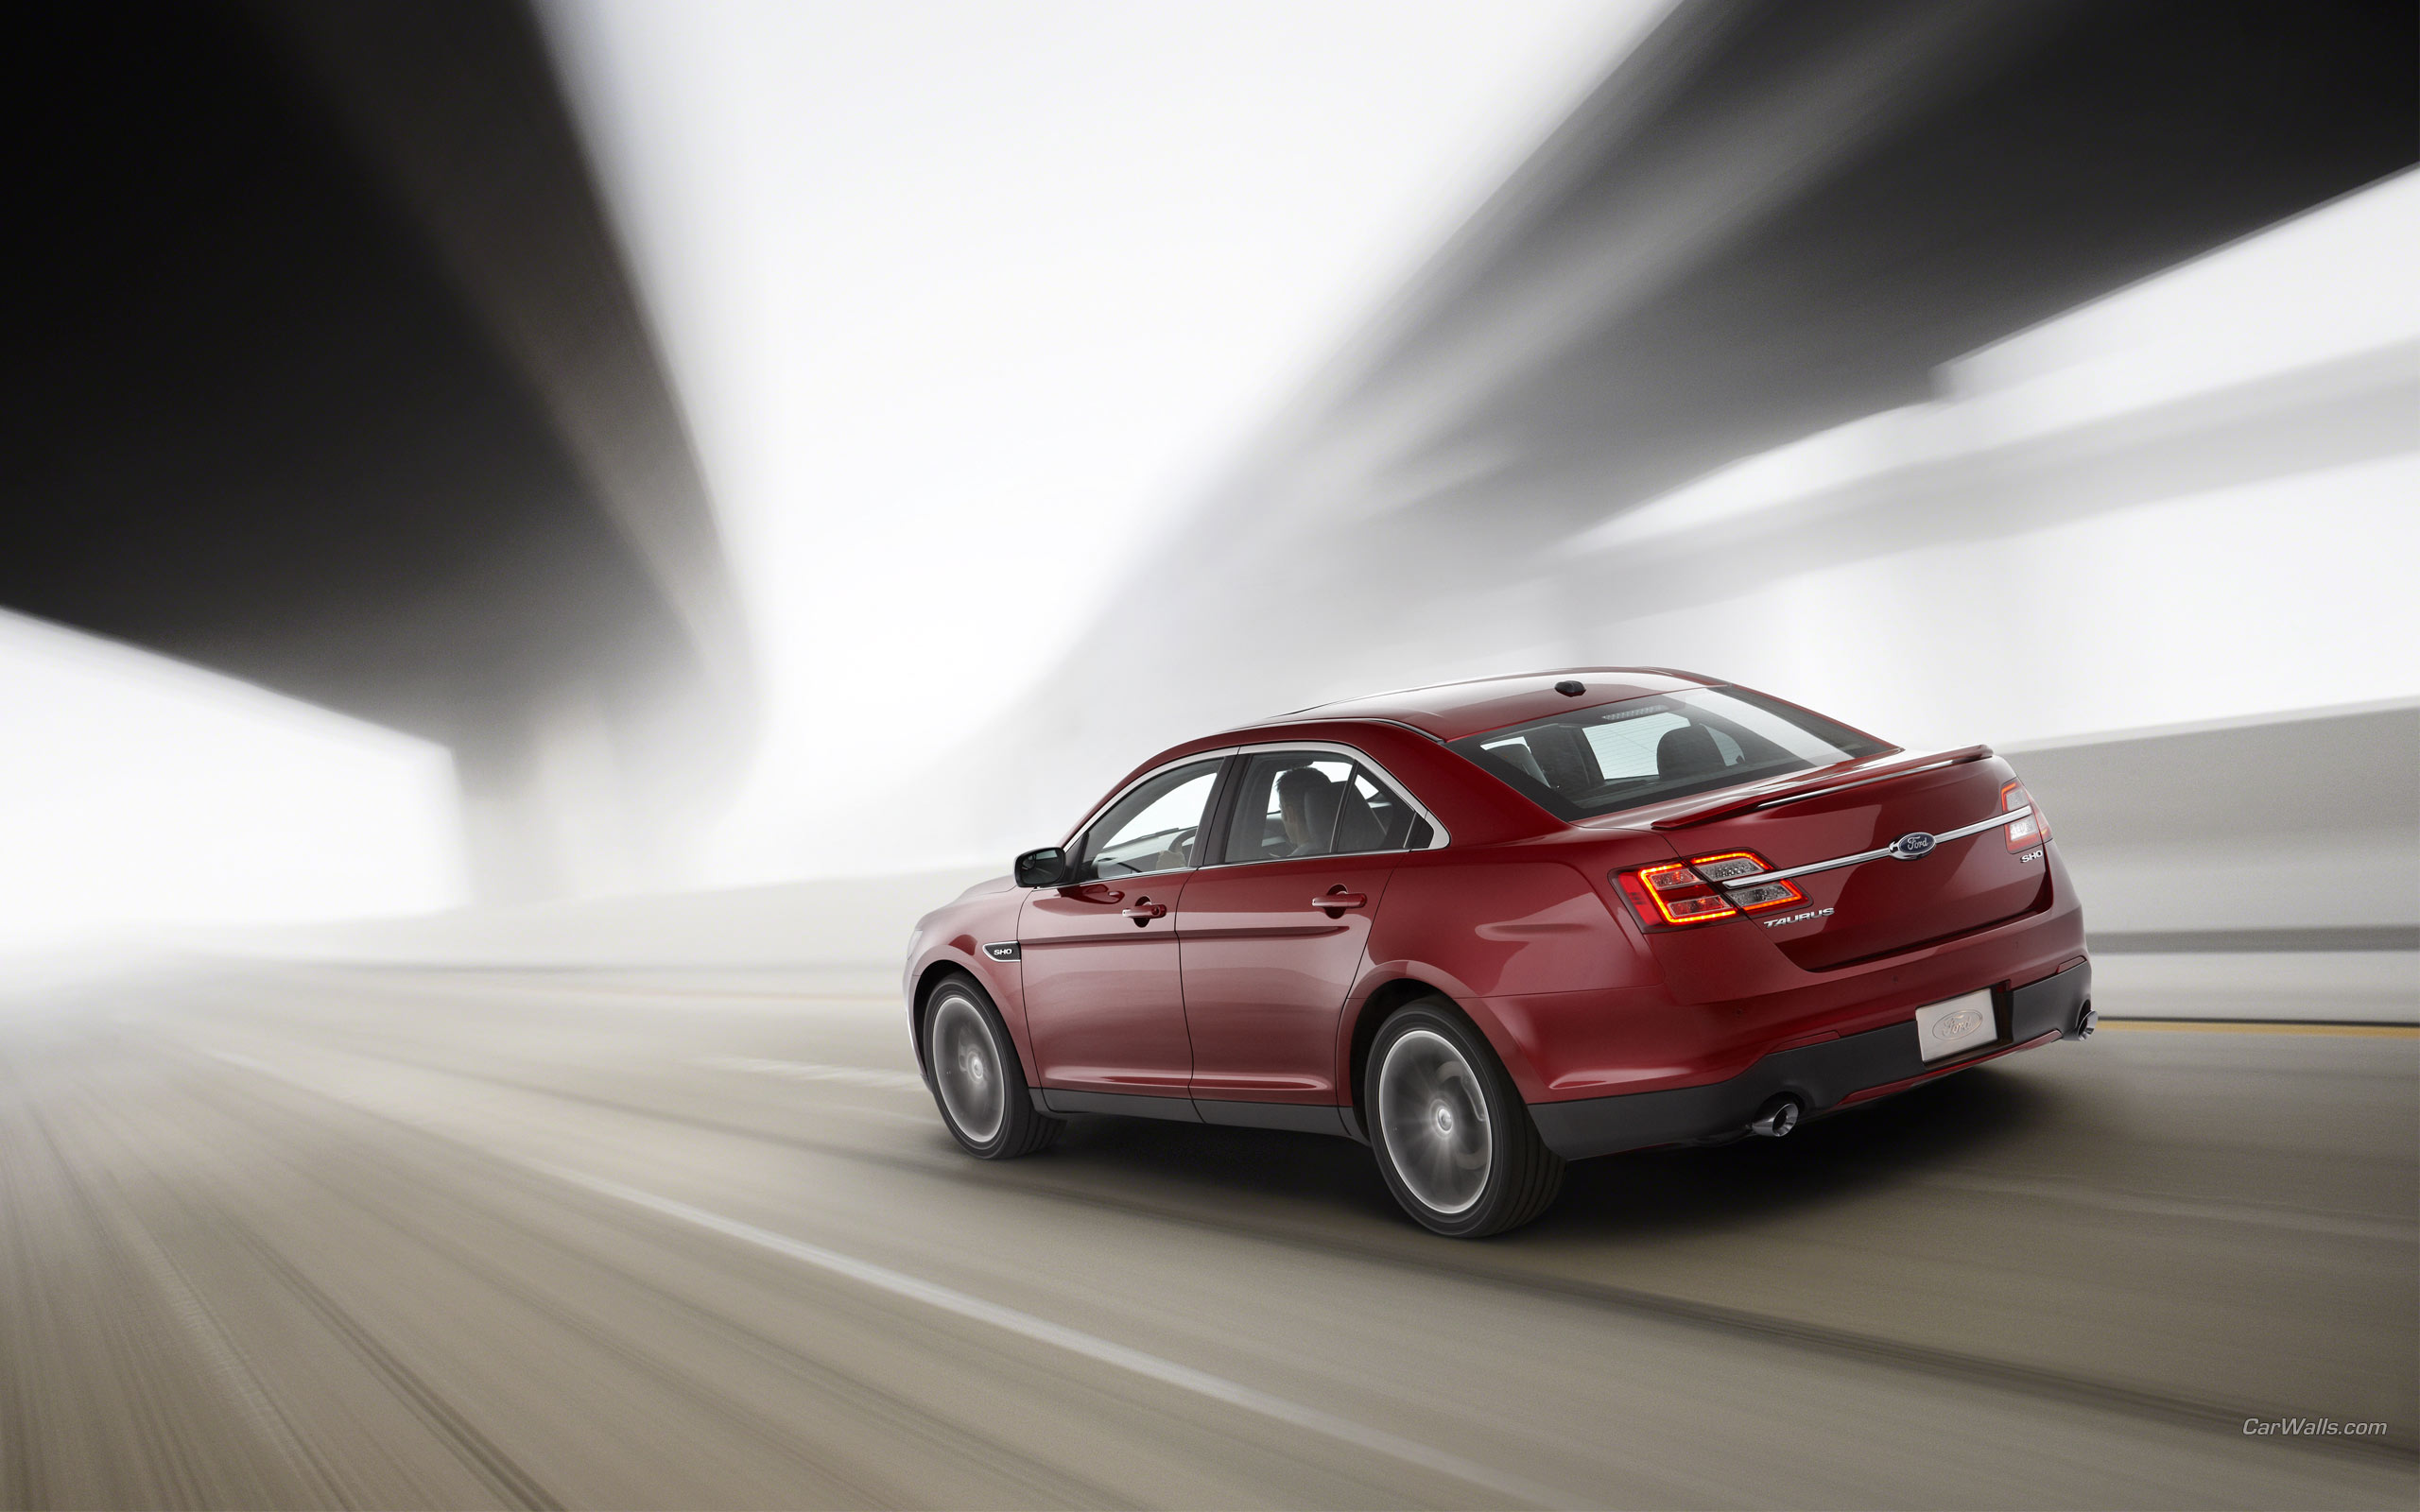 Vehicles 2013 Ford Taurus Sho HD Wallpaper | Background Image